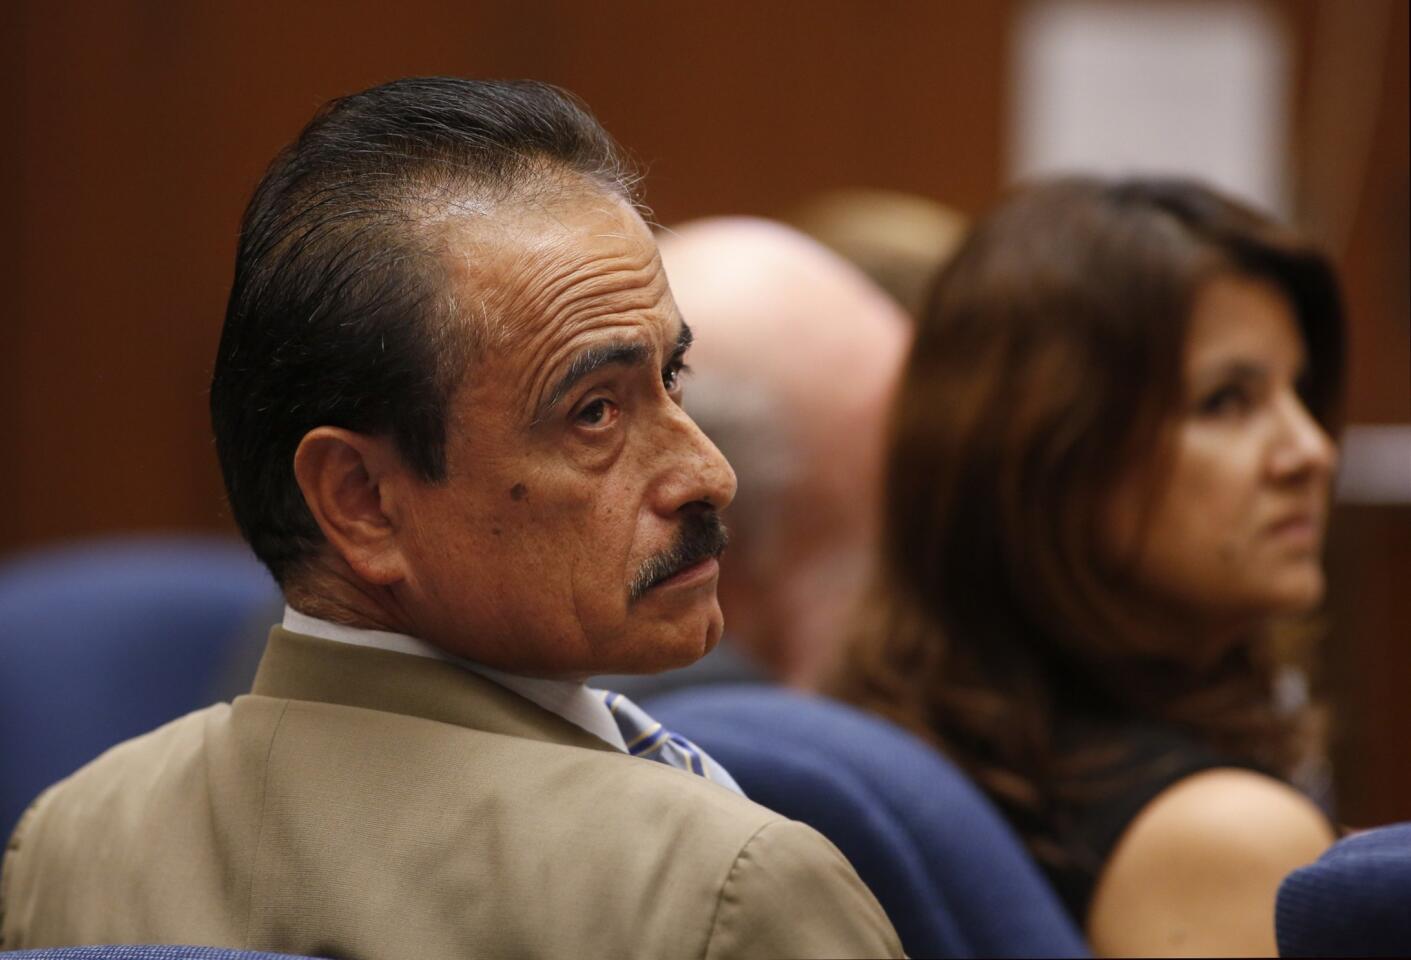 Richard Alarcon, left, and his wife, Flora Montes de Oca Alarcon, at the couple's perjury trial in downtown L.A. on July 8.